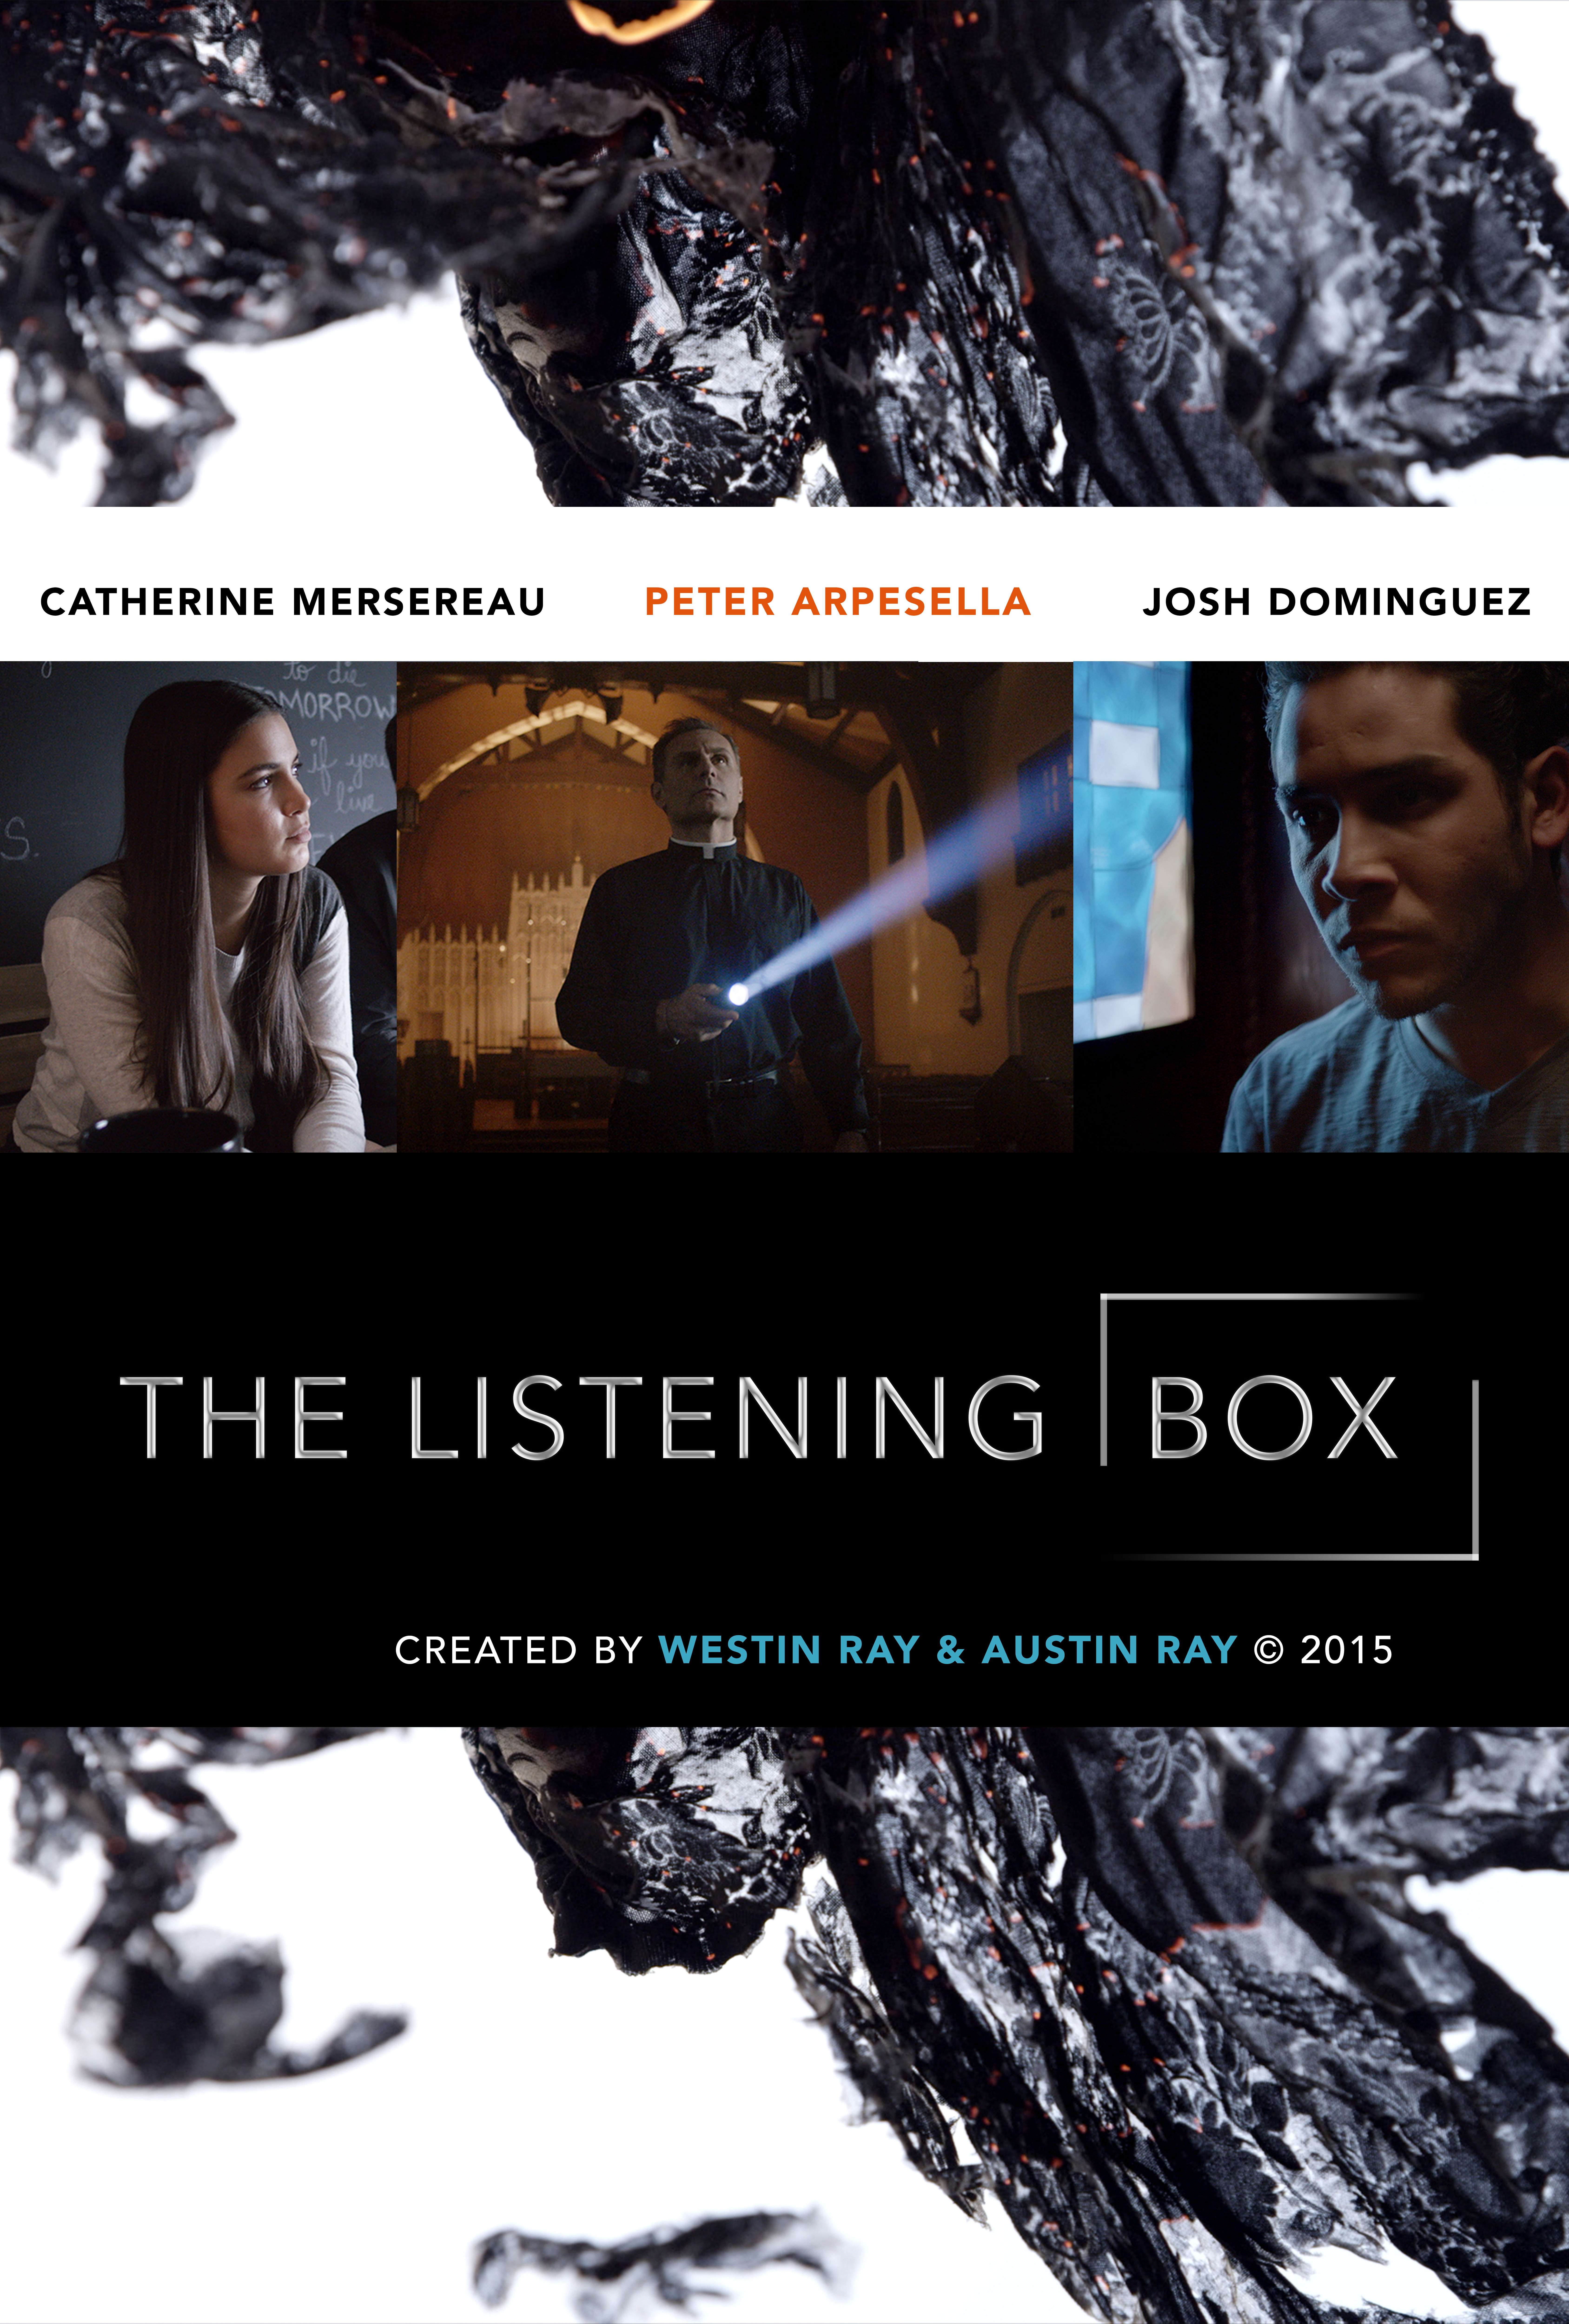 THE LISTENING BOX Poster